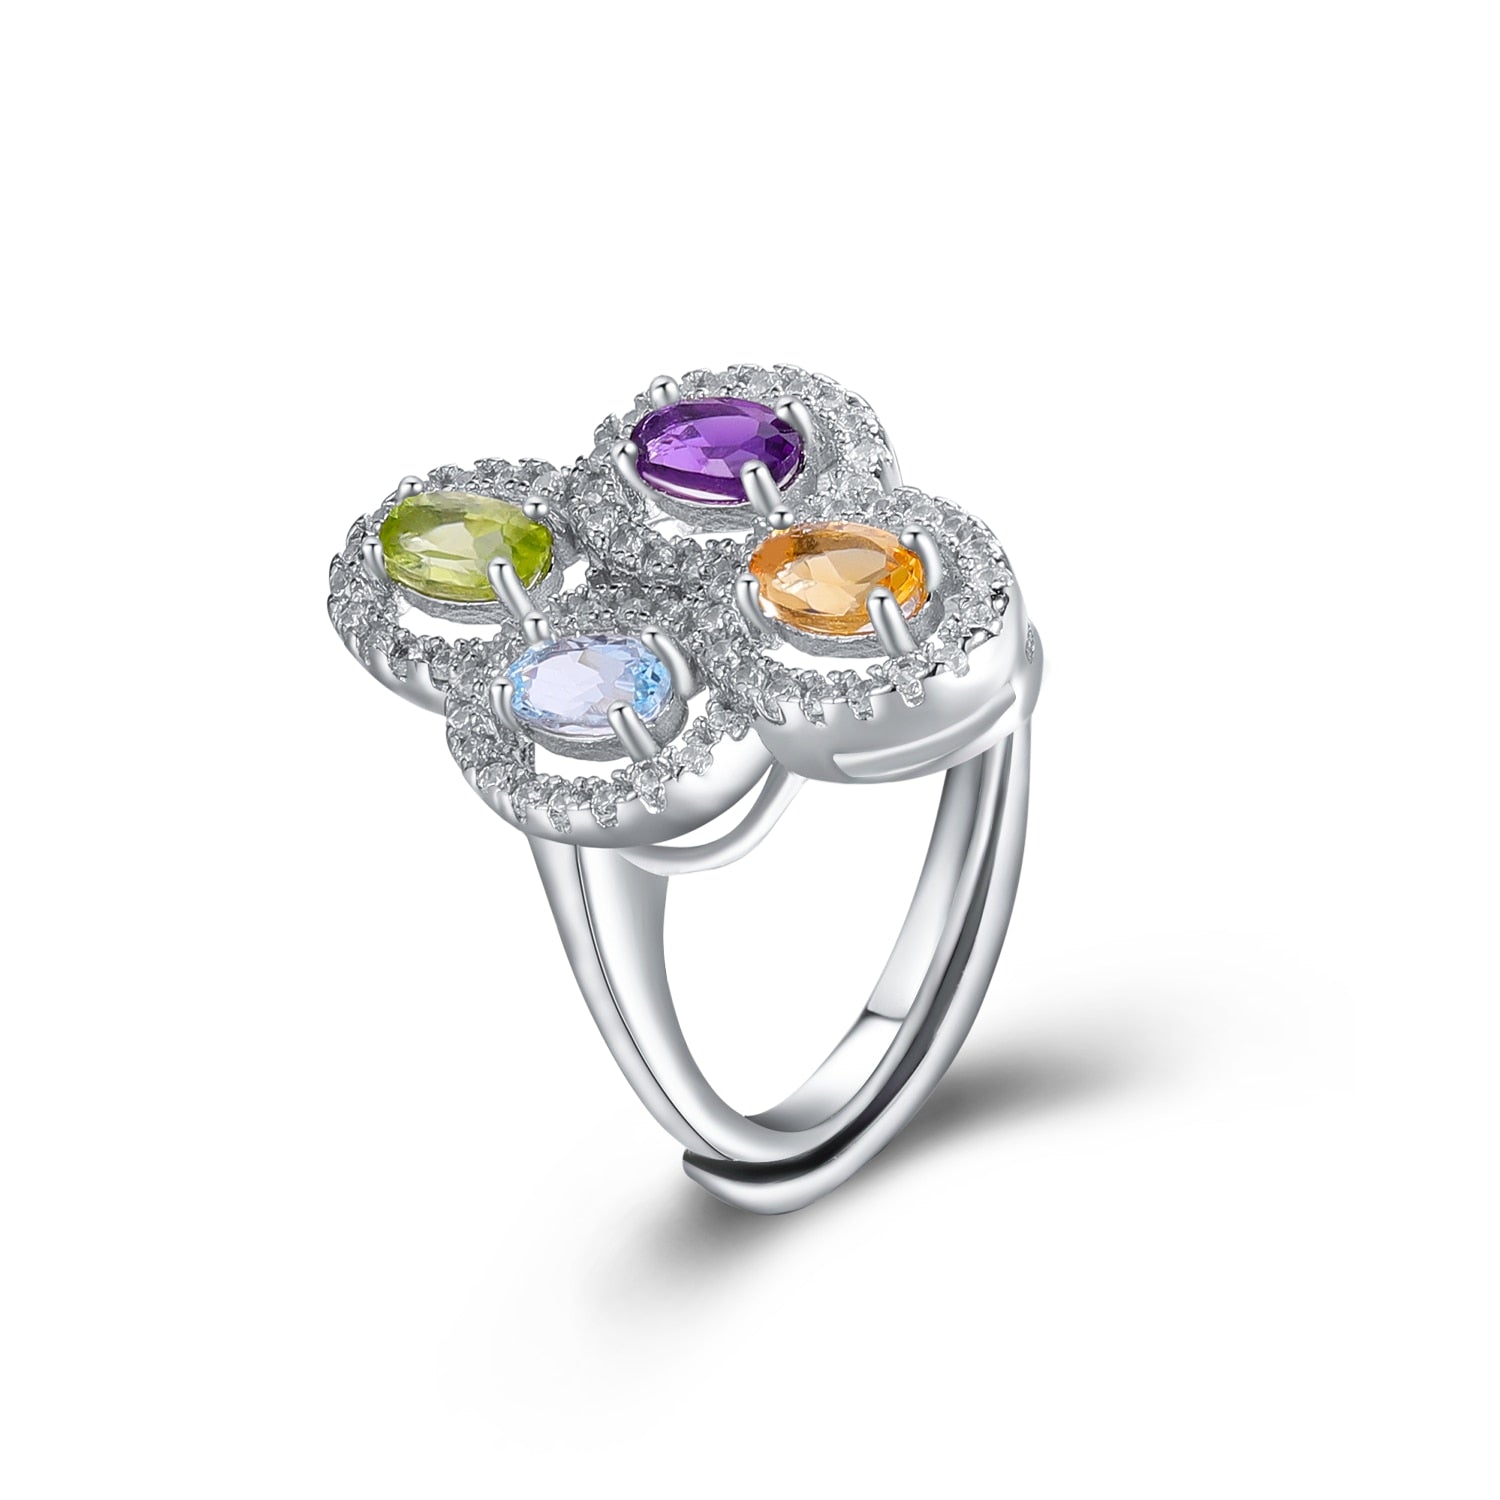 GEM&#39;S BALLET Clover Flower Ring Natural Amethyst Peridot Topaz Citrine Birthstone Ring in 925 Sterling Silver Gift For Her Resizable MIX|925 Sterling Silver